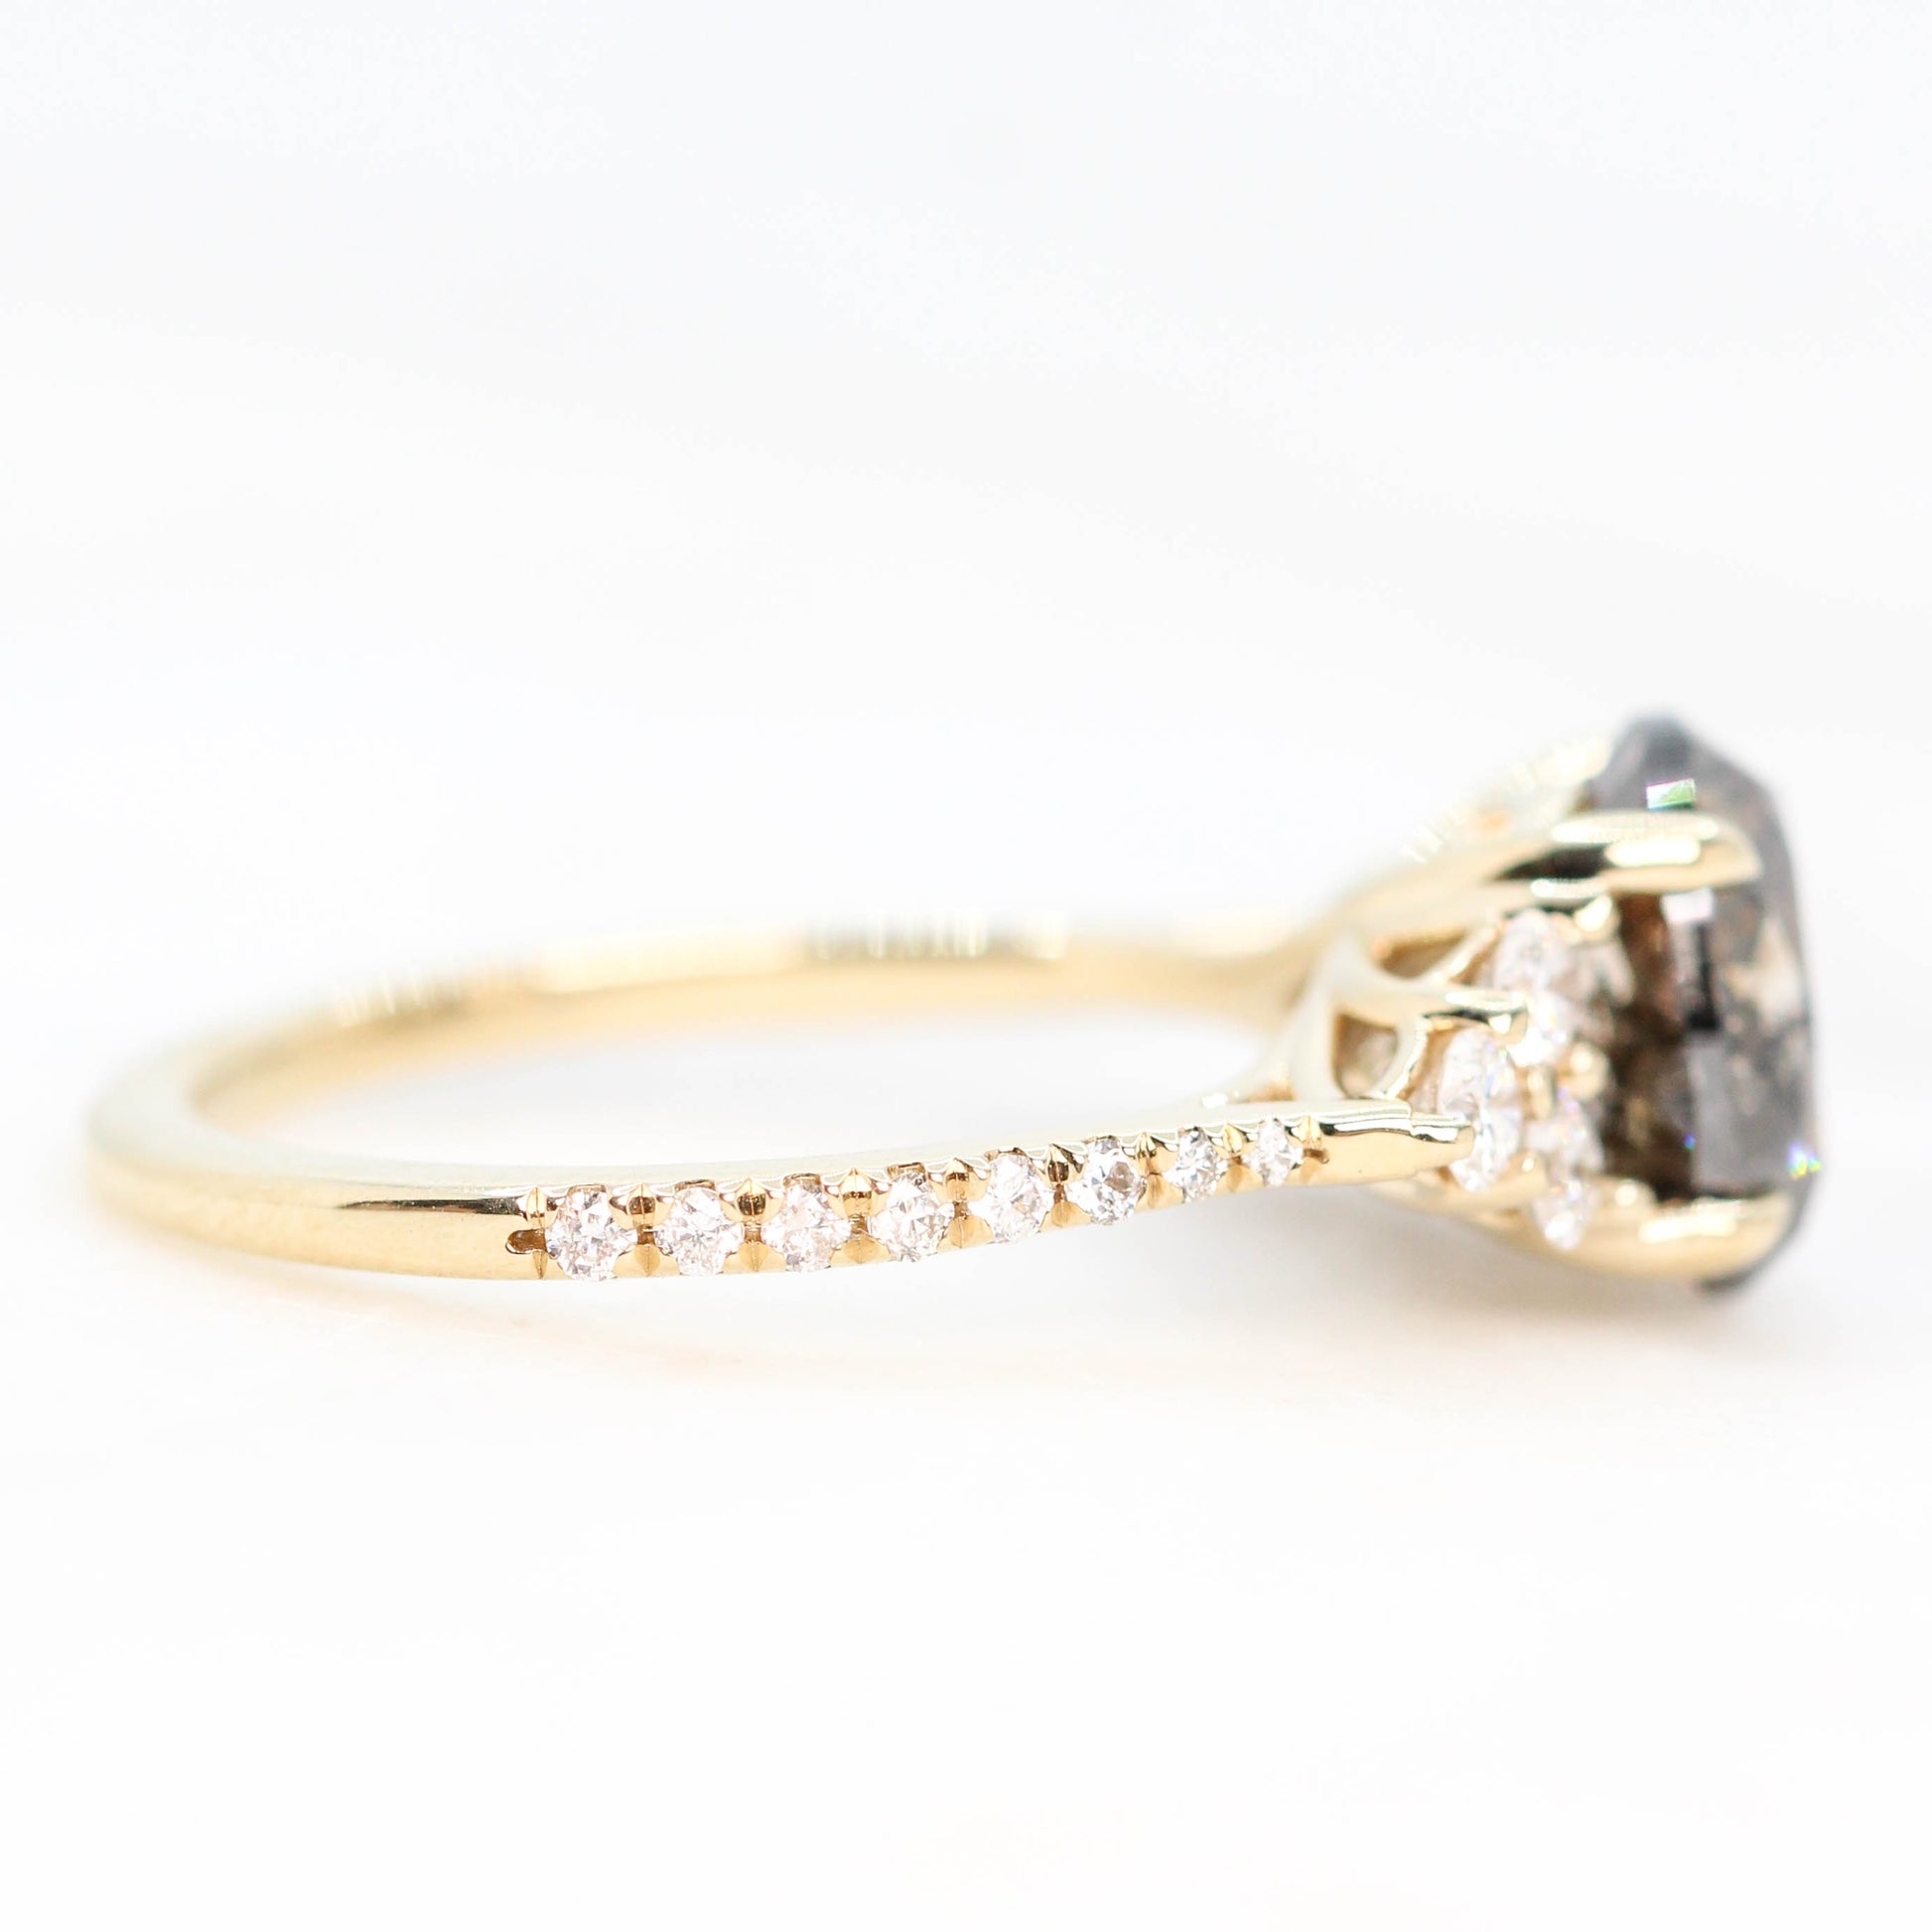 Alexandra Ring with a 2.75 Carat Oval Champagne Salt and Pepper Diamond and White Accent Diamonds in 14k Yellow Gold - Ready to Size and Ship - Midwinter Co. Alternative Bridal Rings and Modern Fine Jewelry